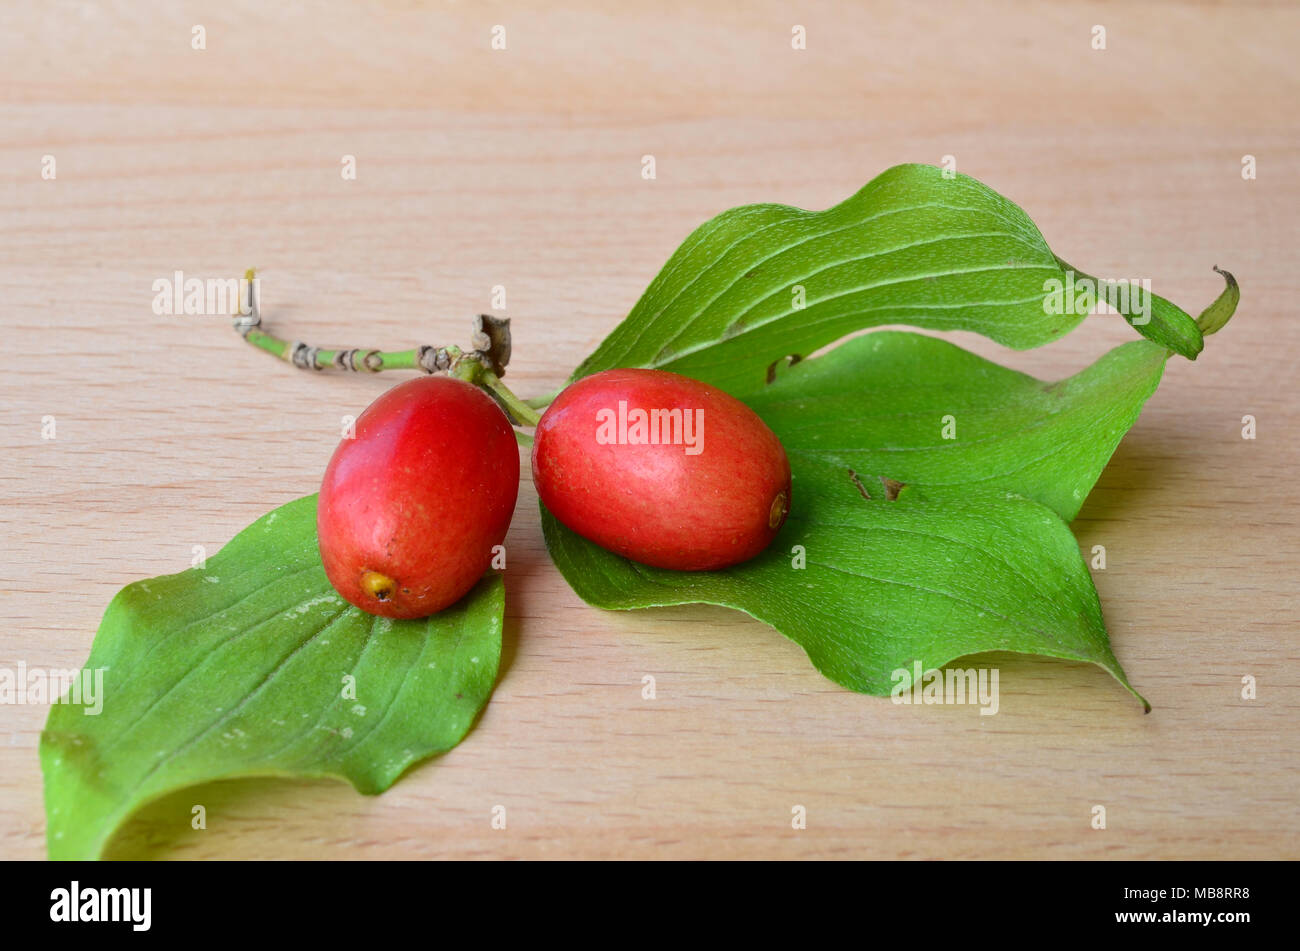 Two fresh, ripe dogwood berries with green leaves on wooden background, close up view Stock Photo